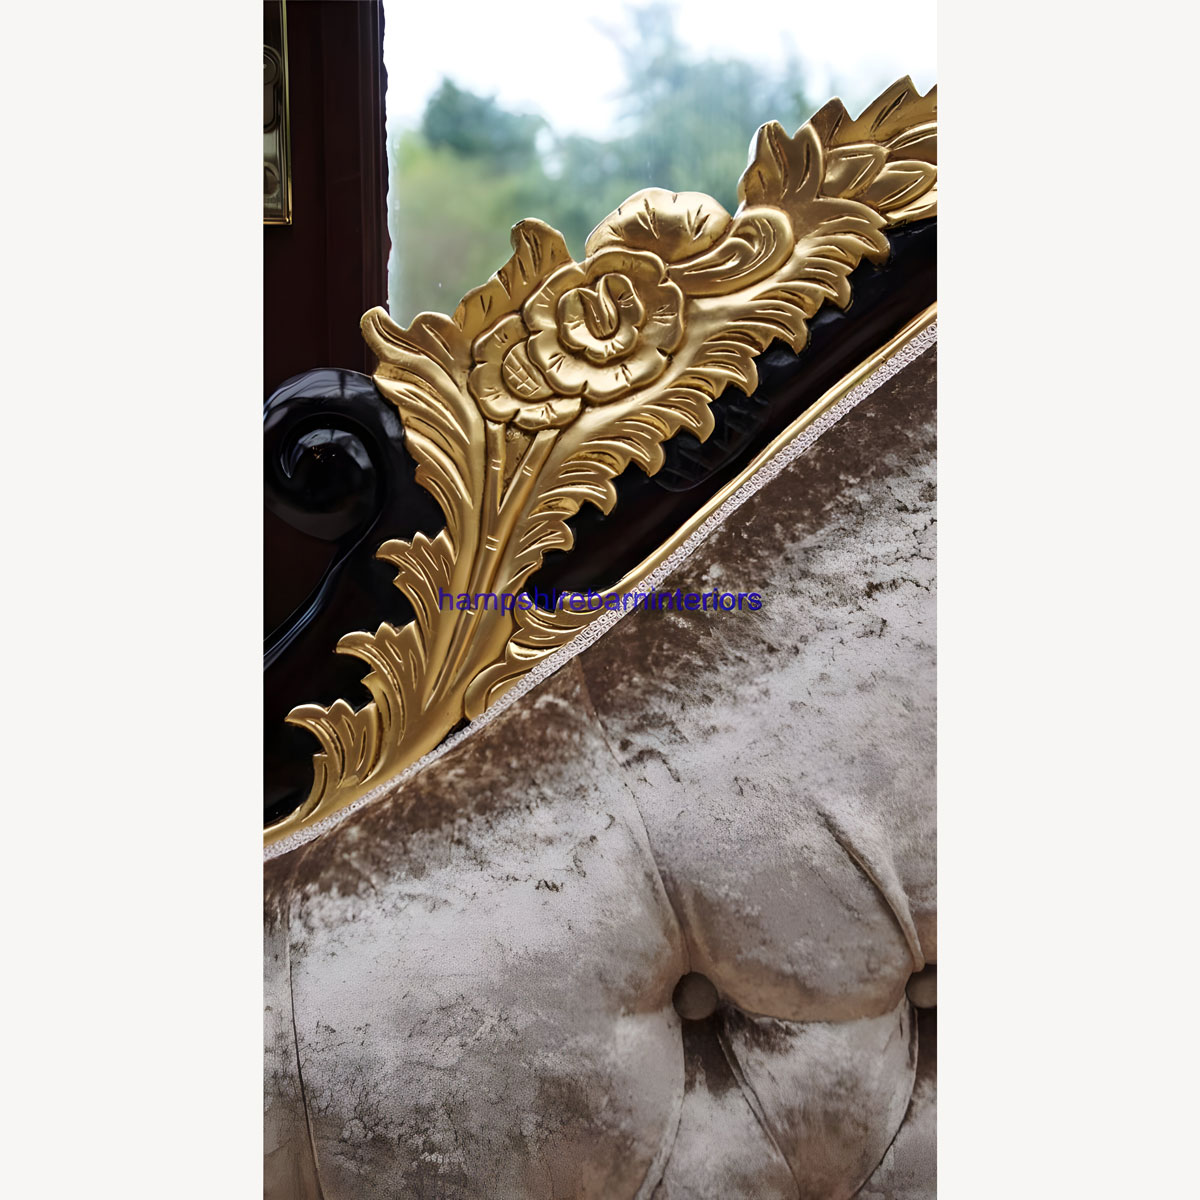 Gold Leaf And Mahogany Hampshire Chaise Medium Size Shown In A Mink Coloured Crushed Velvet 2 - Hampshire Barn Interiors - Gold Leaf And Mahogany Hampshire Chaise Medium Size Shown In A Mink Coloured Crushed Velvet -